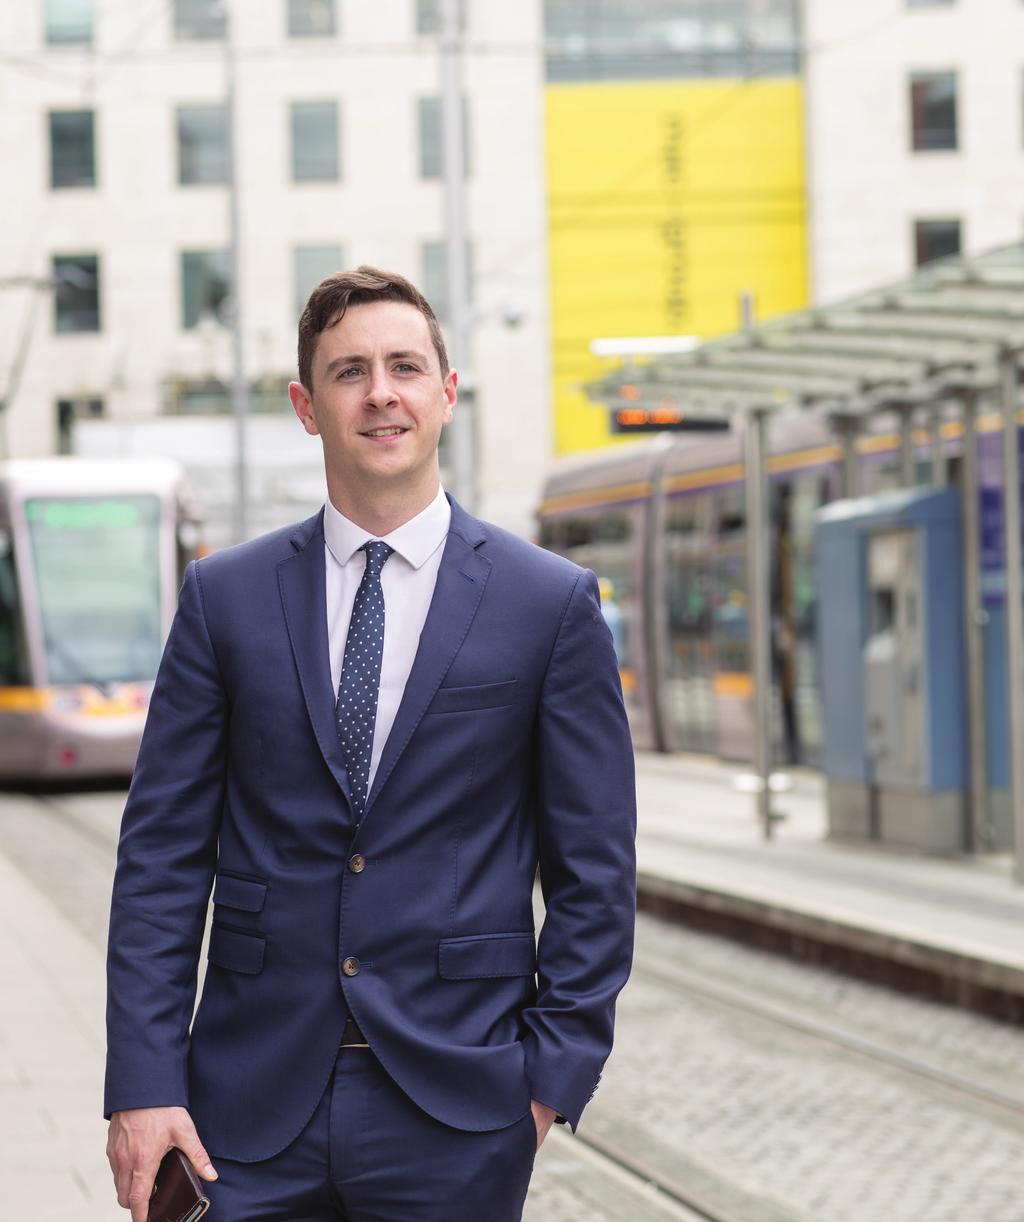 ROBERT MCGARRY Consulting Trainee Joined Mazars in 2017 As a Consulting Trainee you are provided with the opportunity to work with a wide range of clients and